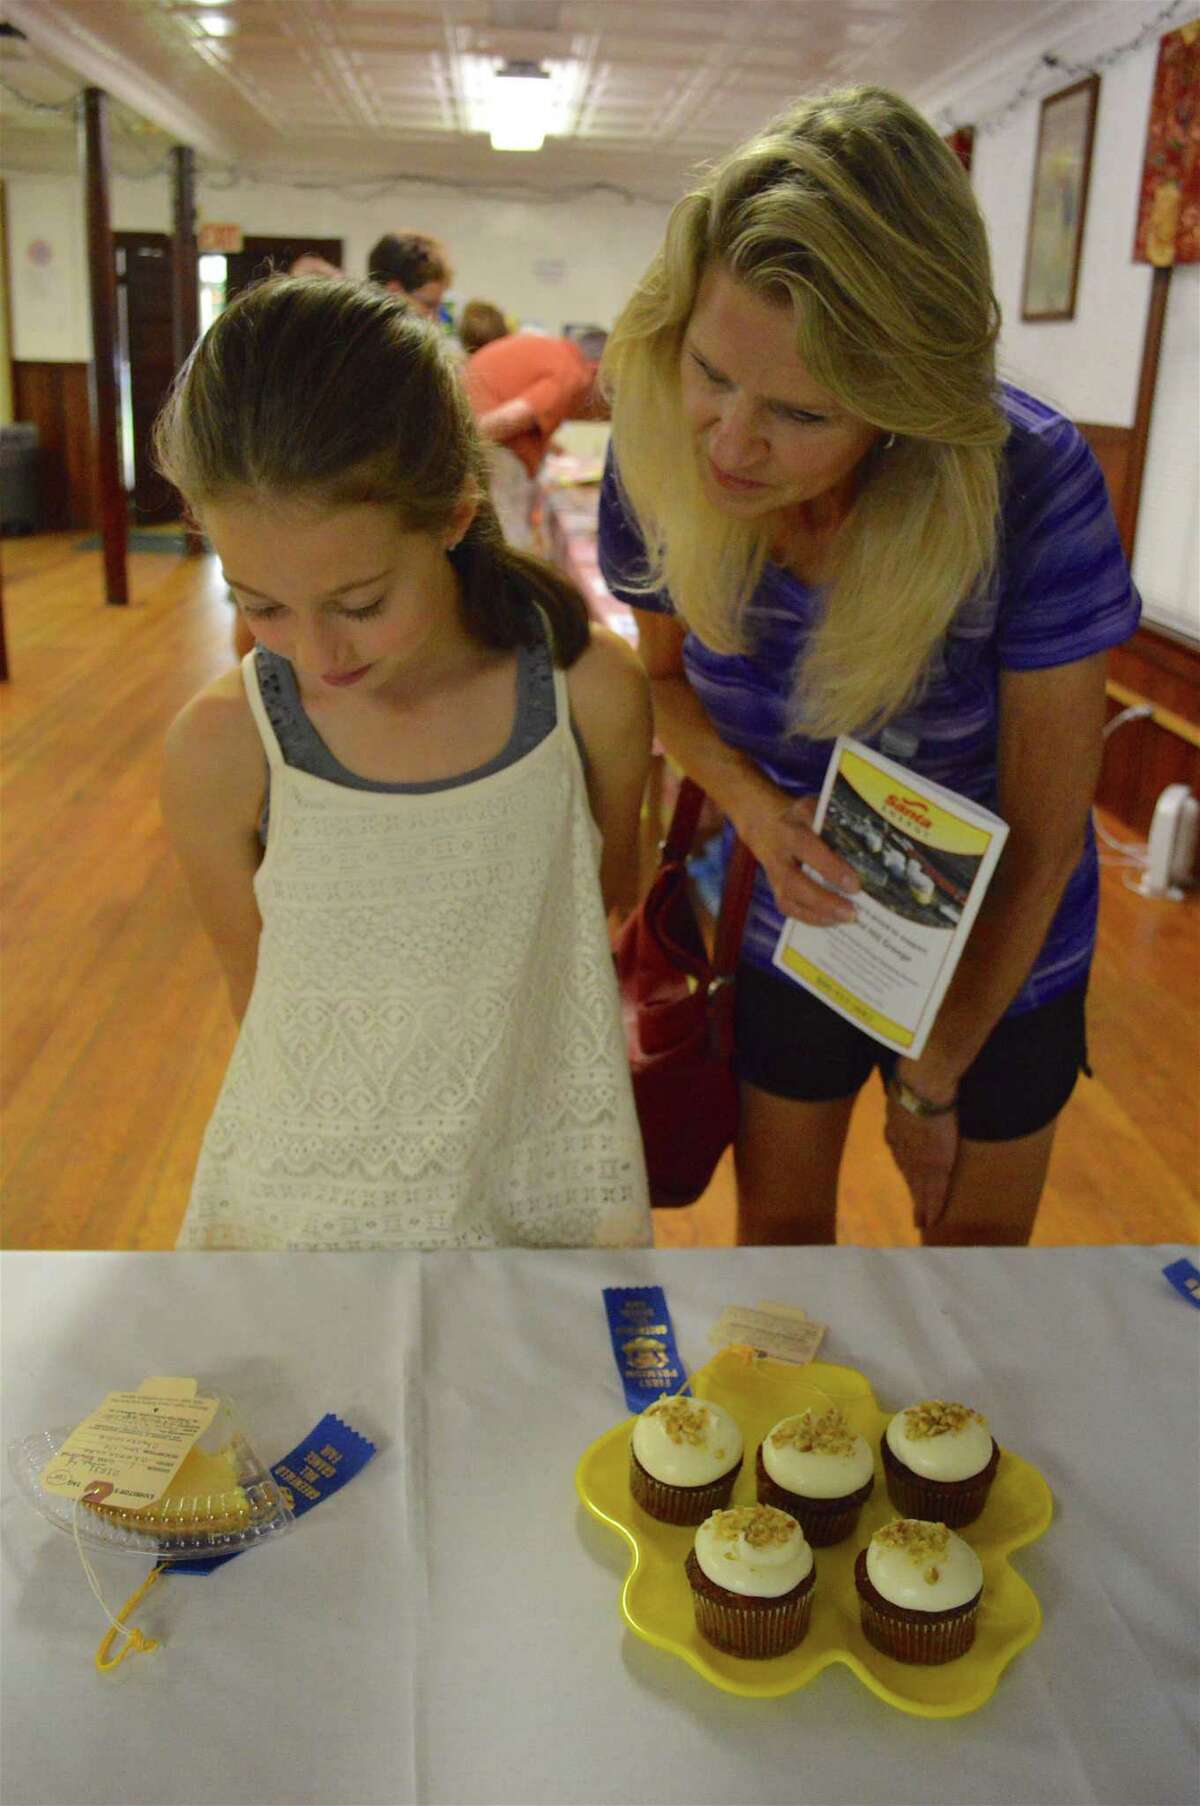 Bella Lombardi, 9, of Fairfield, and Pamela Cotter of Trumbull take a look at some prize-winning desserts at the Greenfield Hill Grange Hall Agricultural Fair, Saturday, Aug. 20, 2017, in Fairfield, Conn.